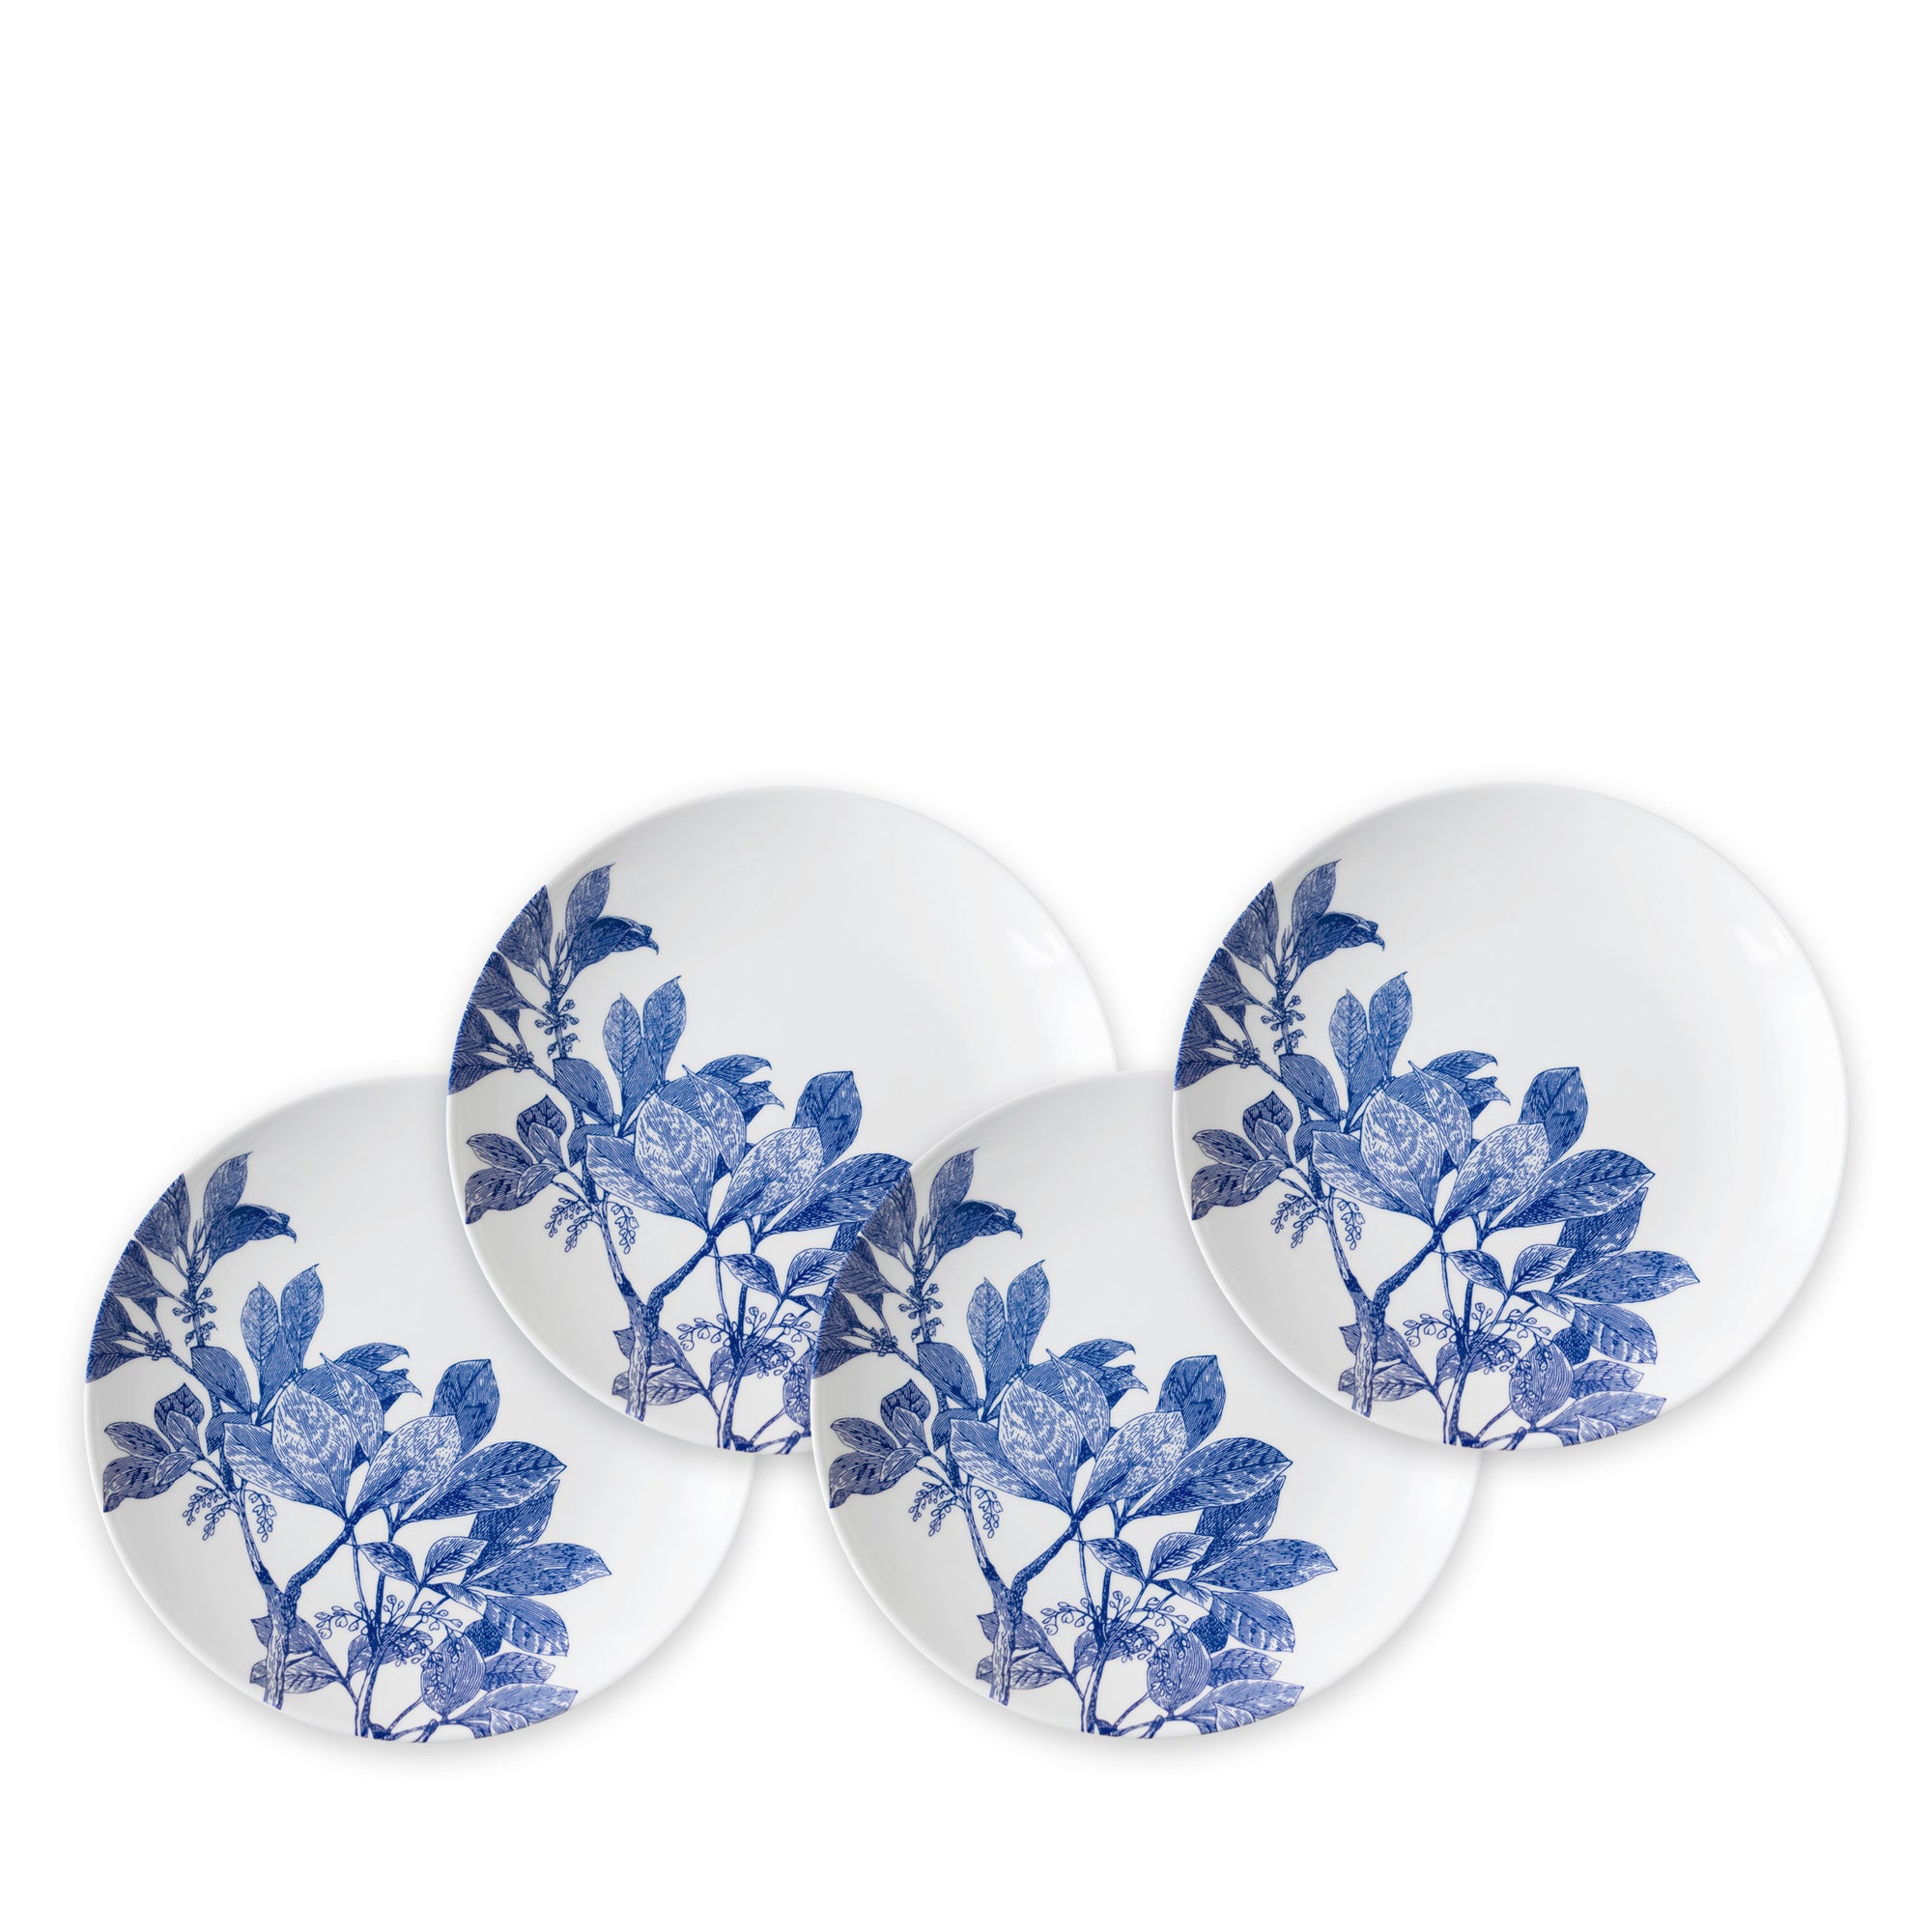 Set of four heirloom-quality Arbor Blue Small Plates from Caskata Artisanal Home in pristine white, adorned with blue botanical details on one side, arranged in a slightly overlapping manner.